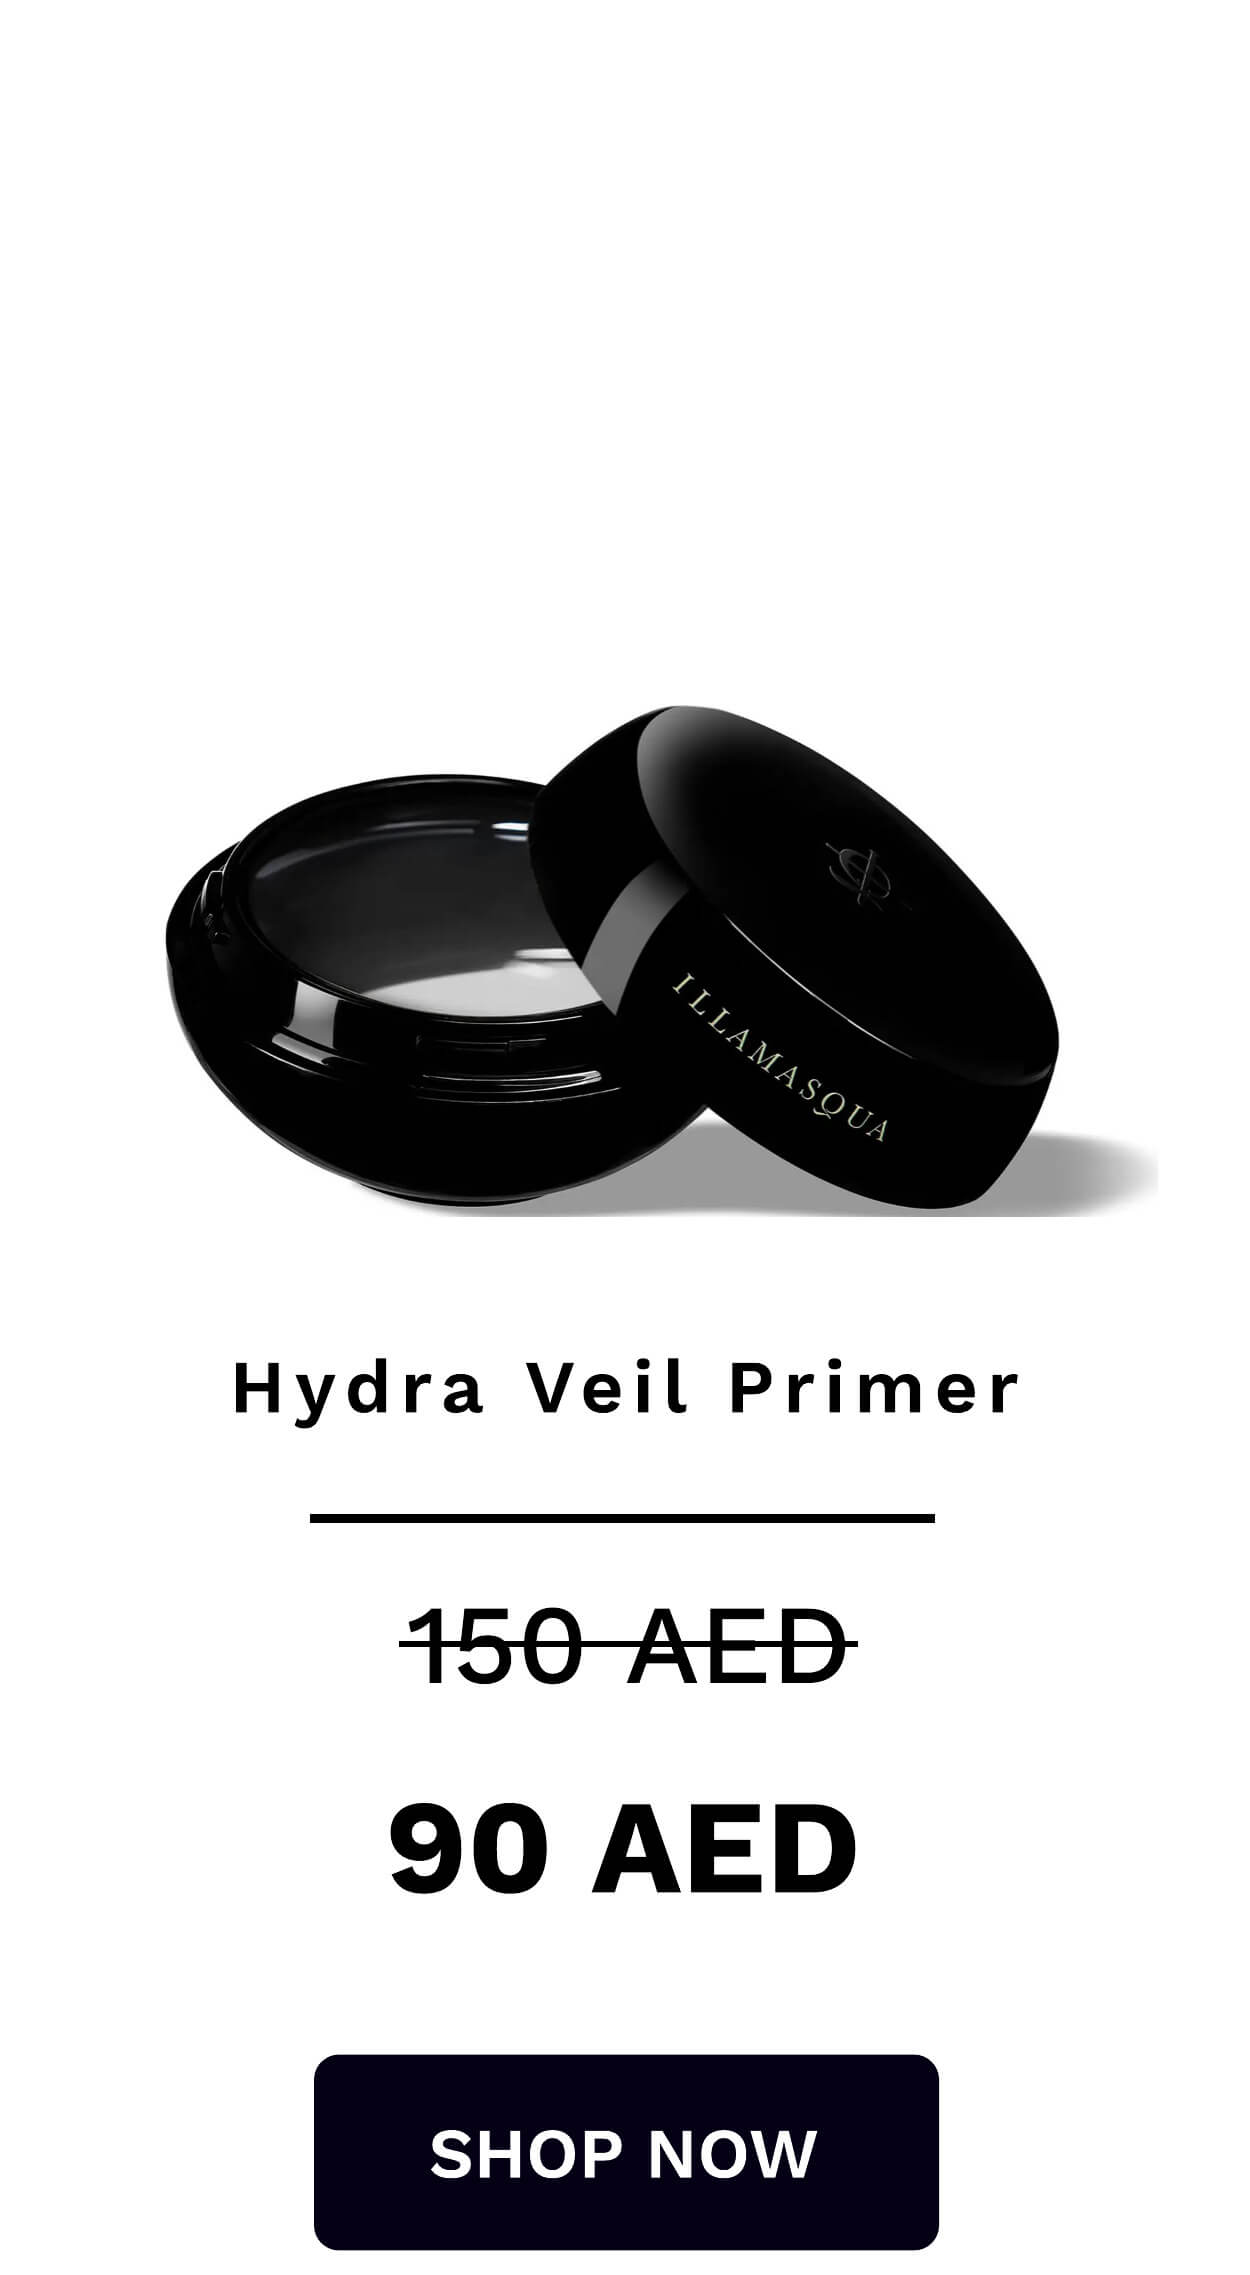  Hydra Veil Primer 150-AED 90 AED SHOP NOW 